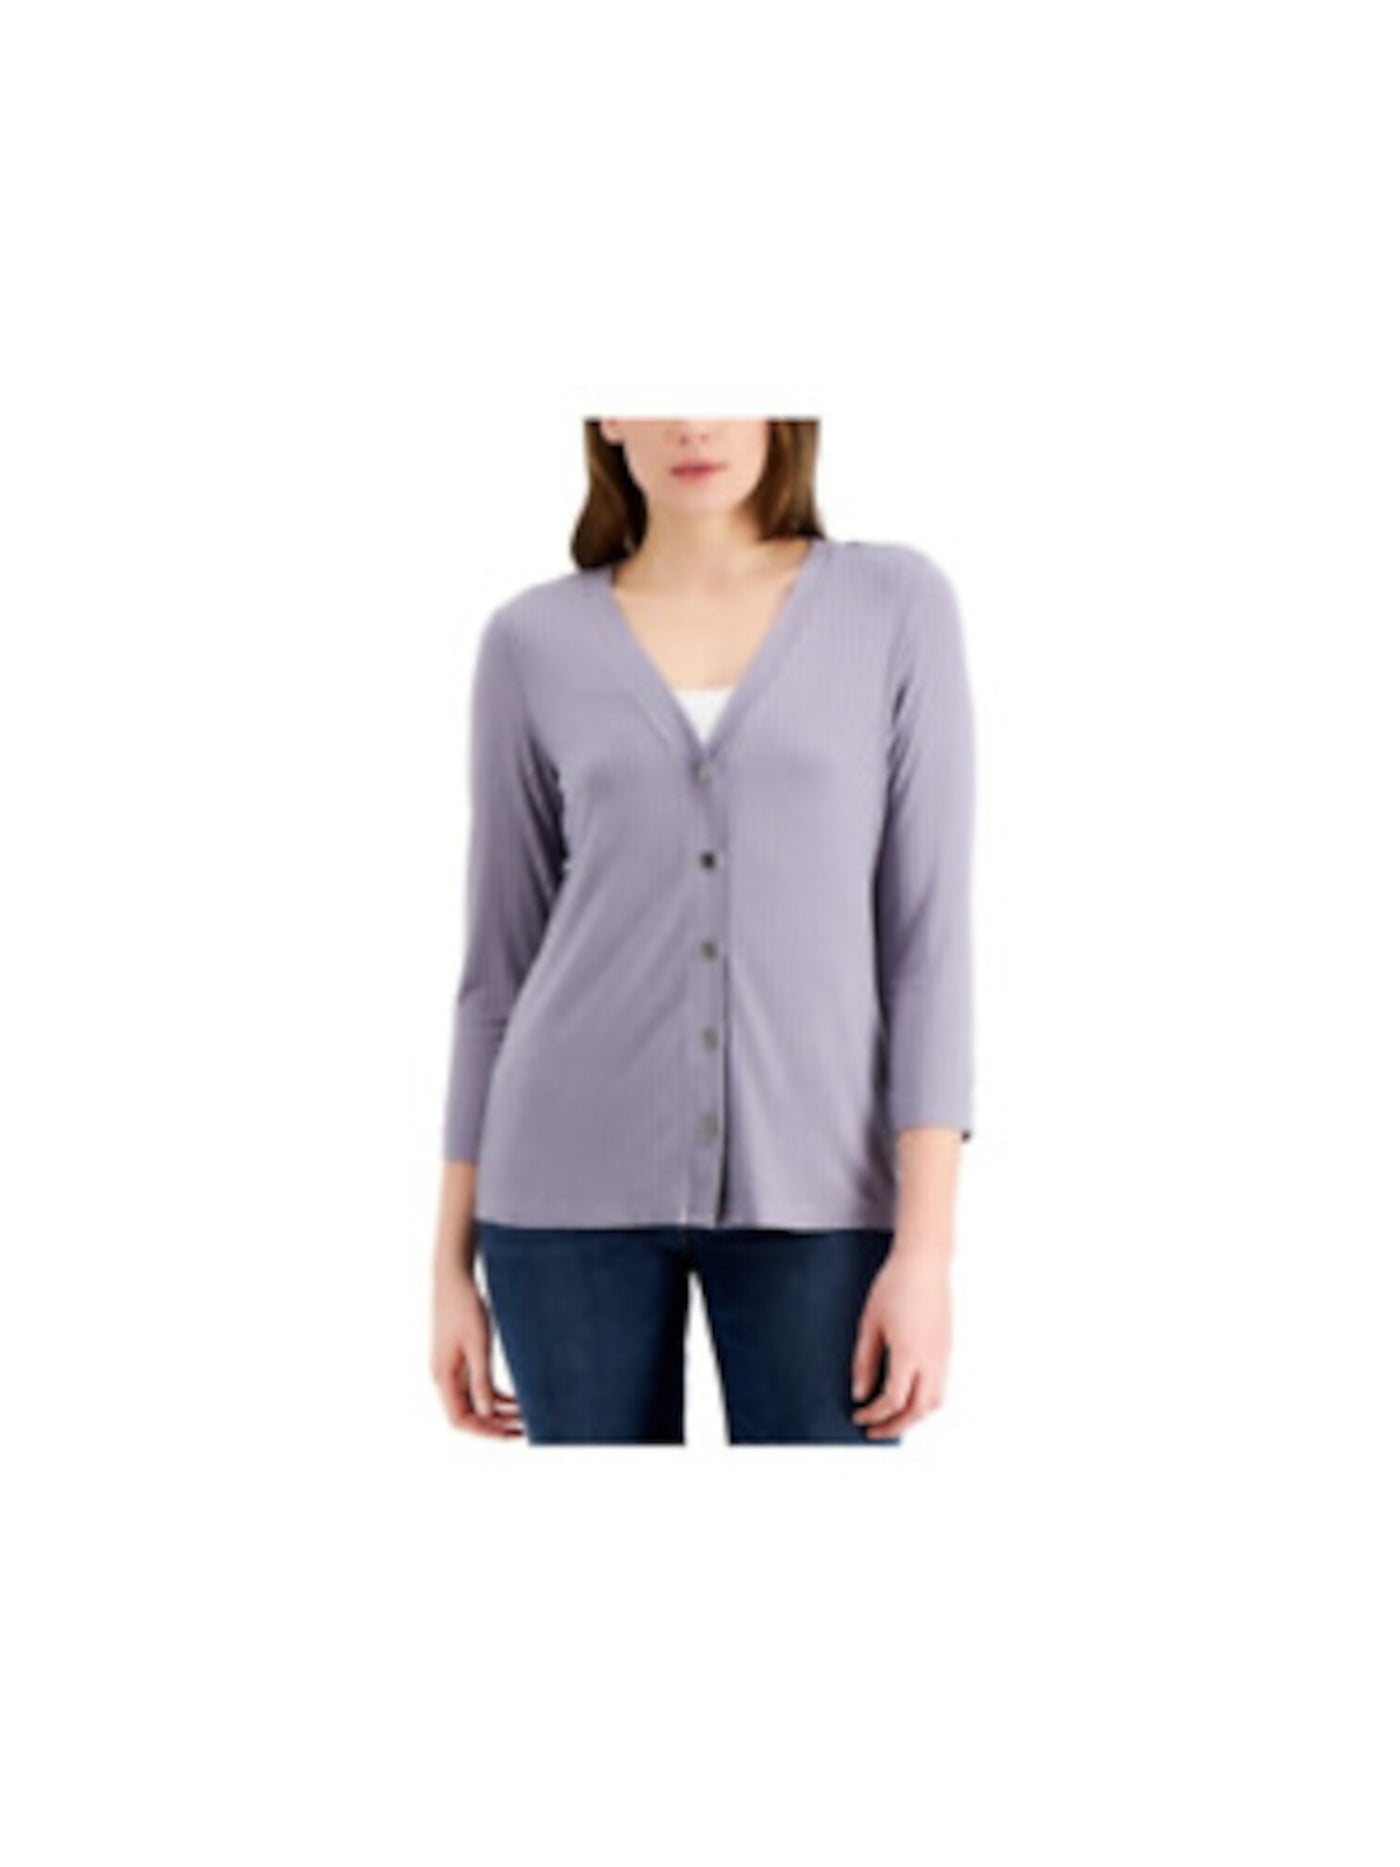 FEVER Womens Gray Long Sleeve V Neck Wear To Work Button Up Top S